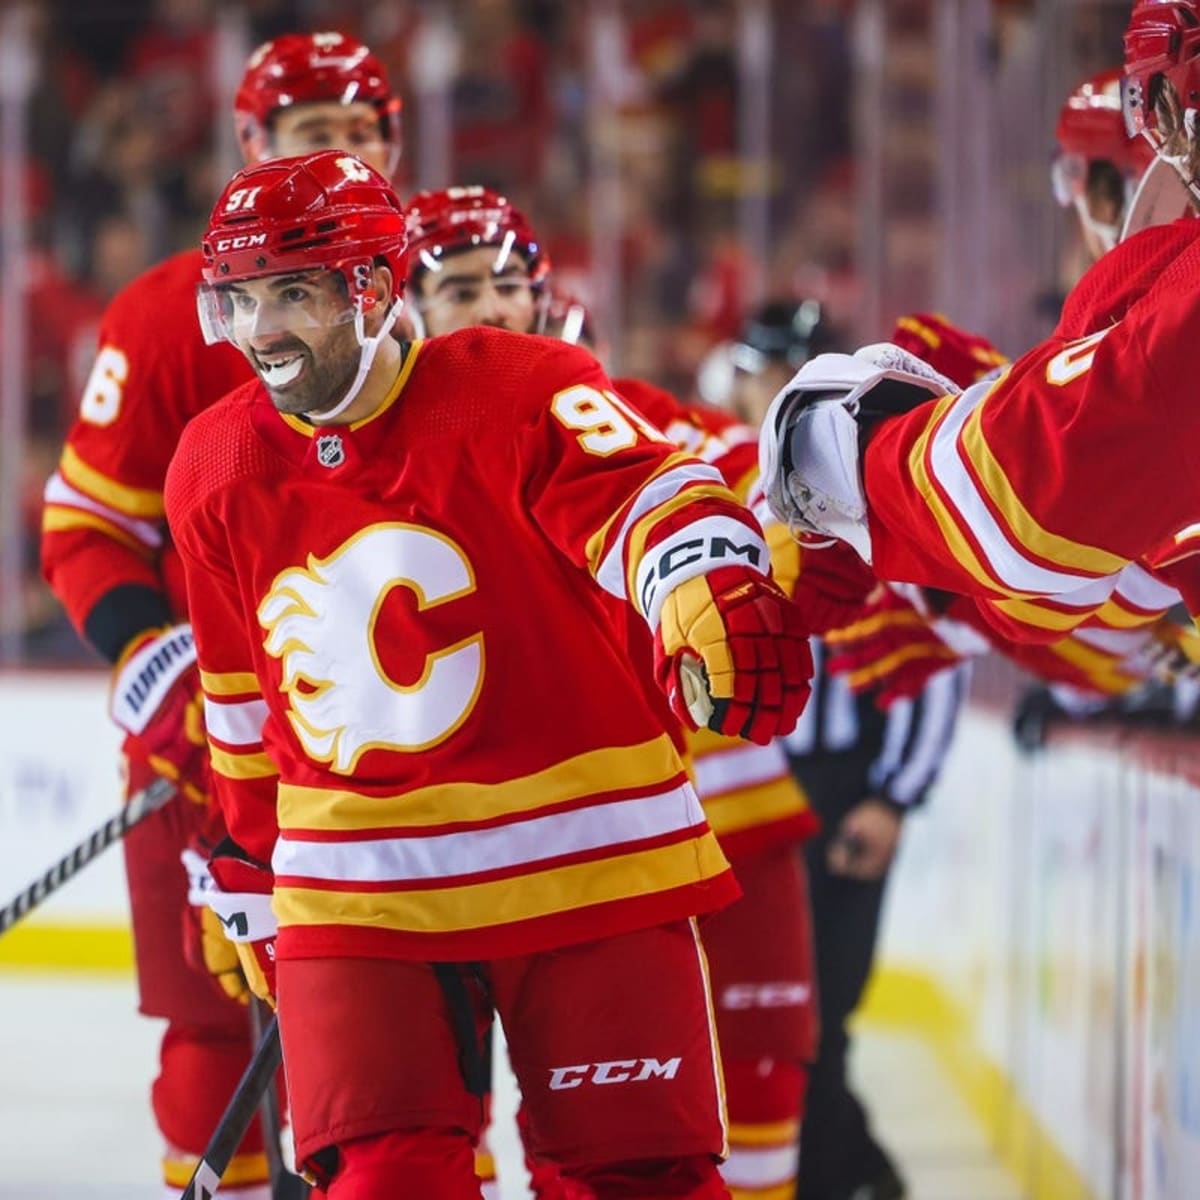 WePlayHere: Calgary Flames Foundation wants to know what play